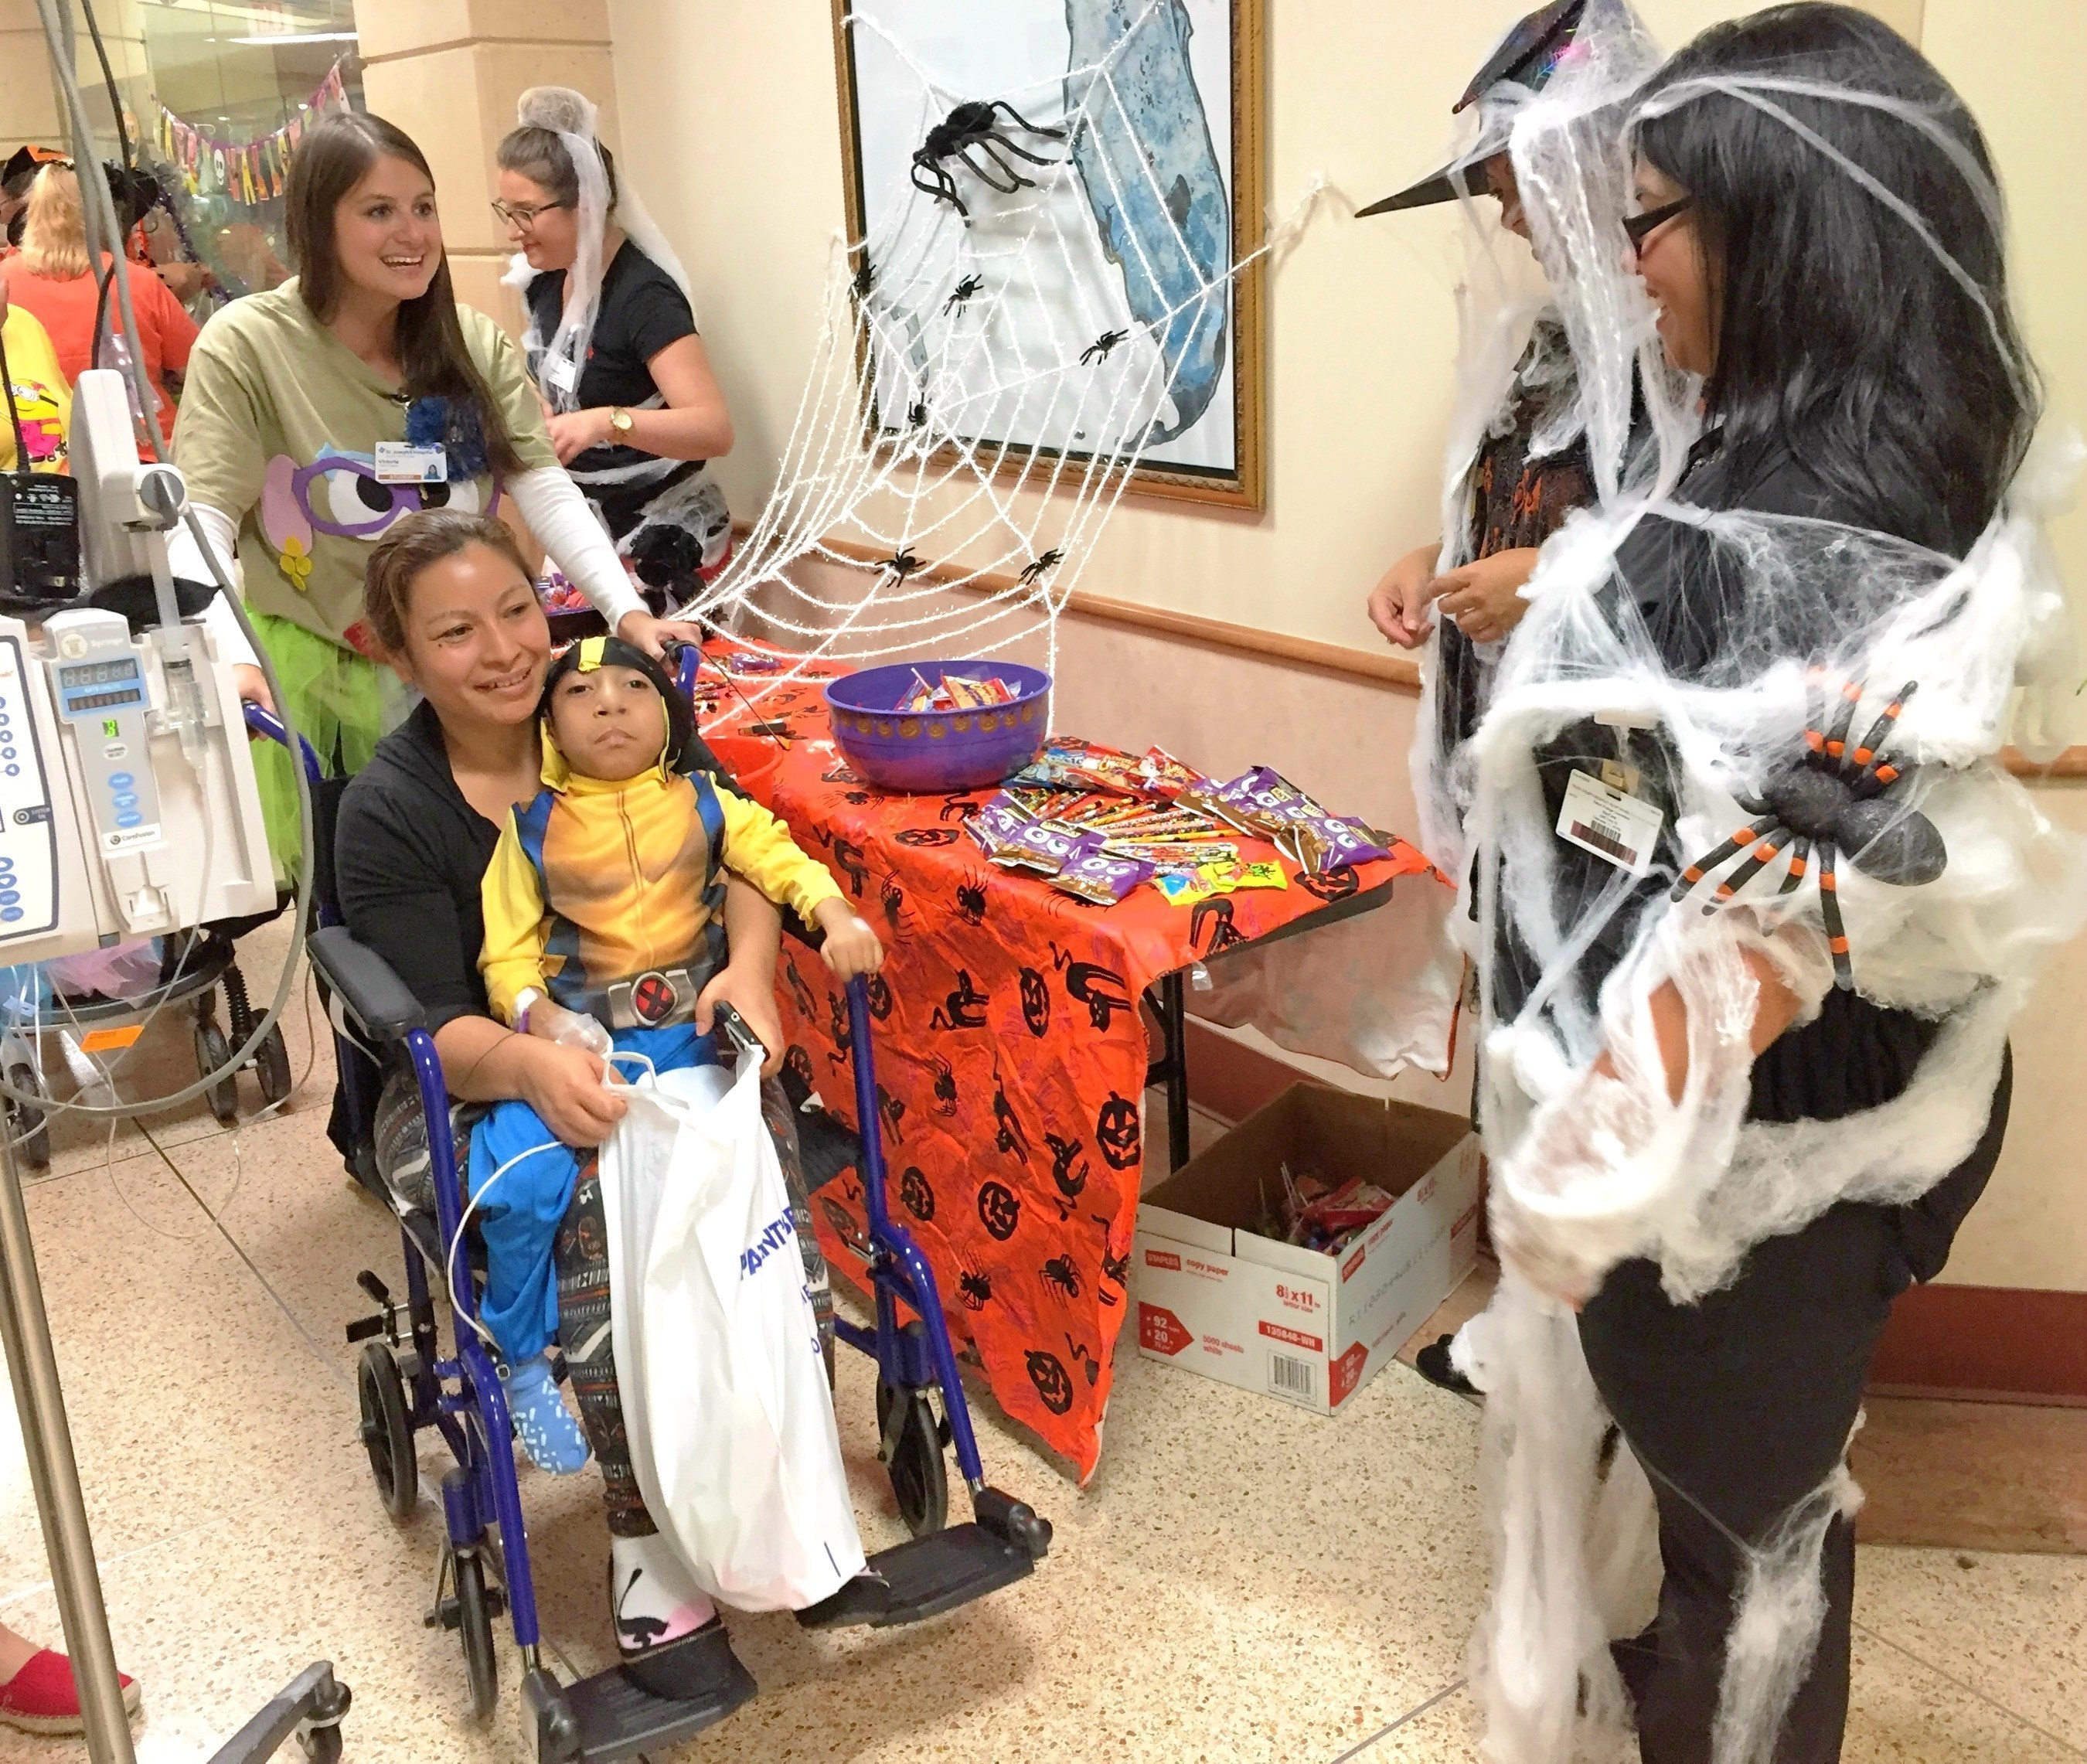 Patients at St. Joseph's Children's Hospital in Tampa celebrated Halloween by trick-or-treating throughout the hospital on Friday, Oct. 30, 2015.